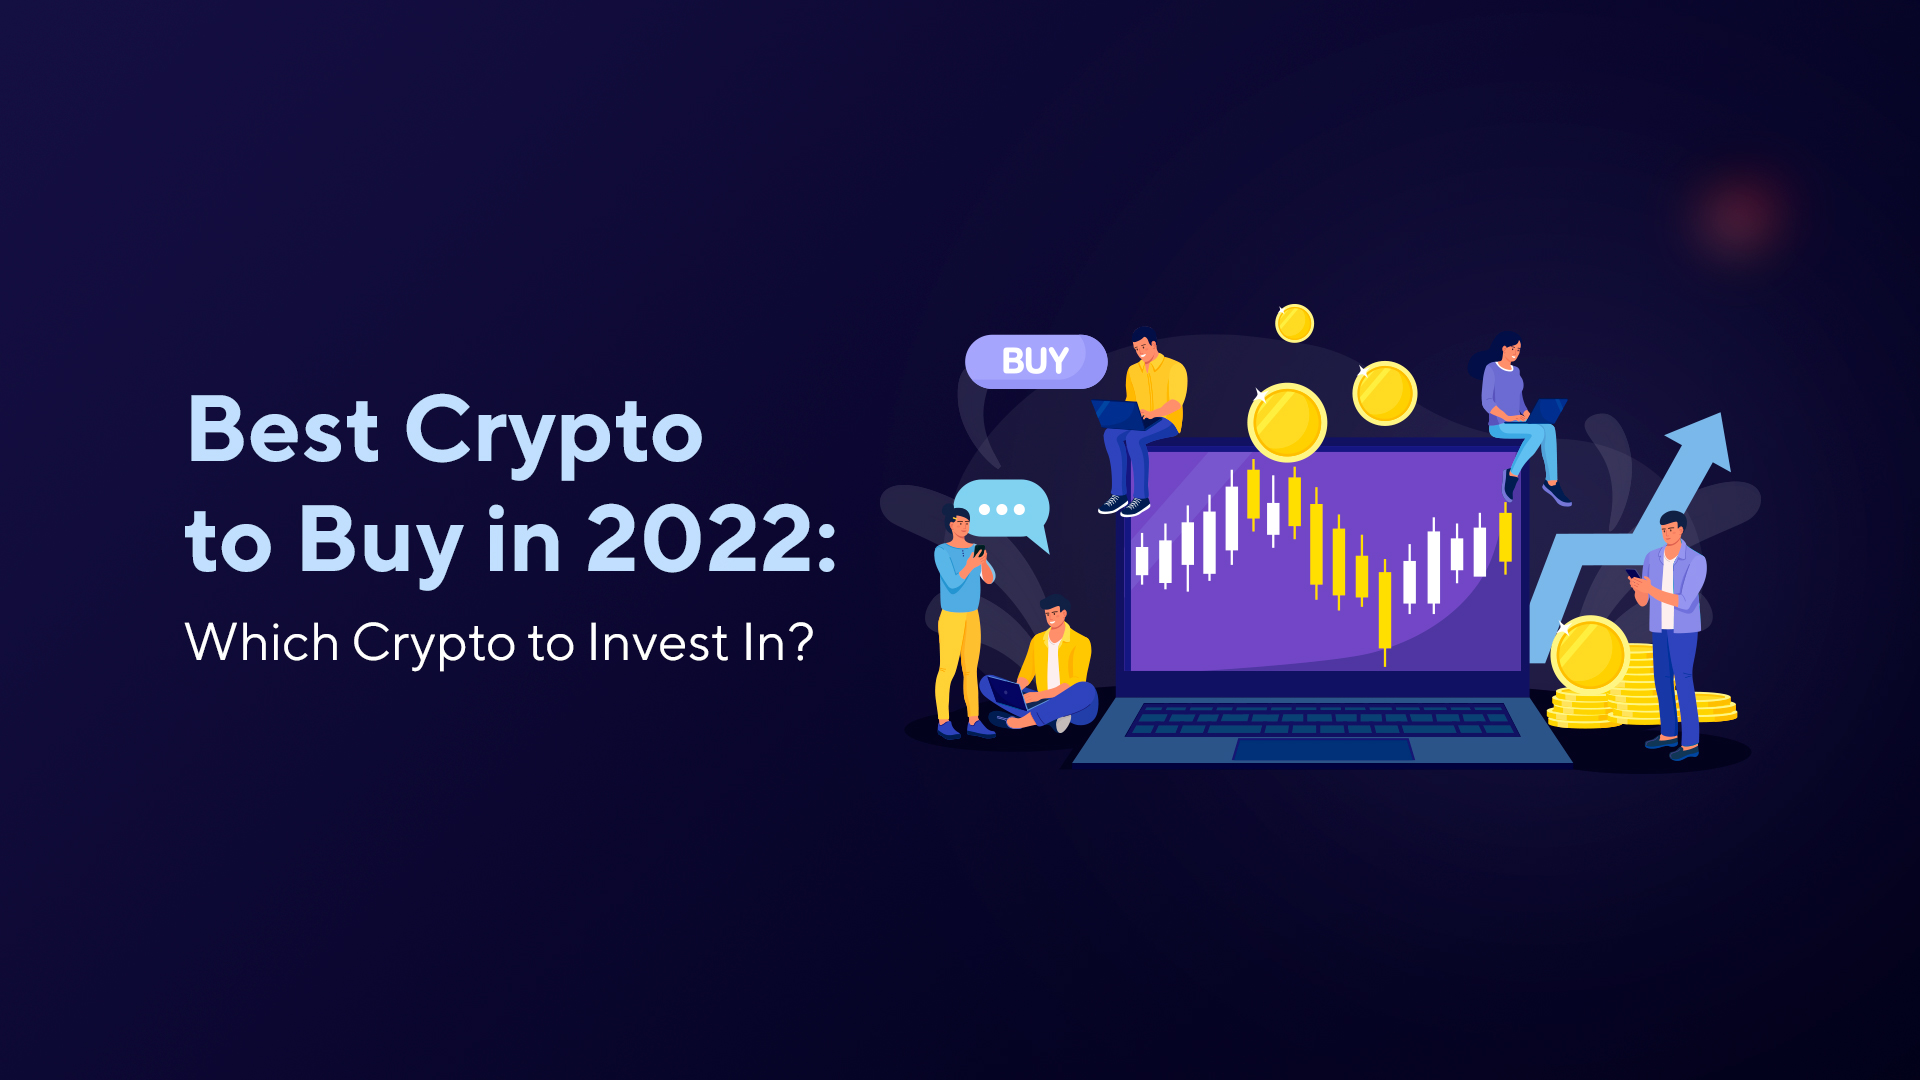 3 best crypto to invest in 2022